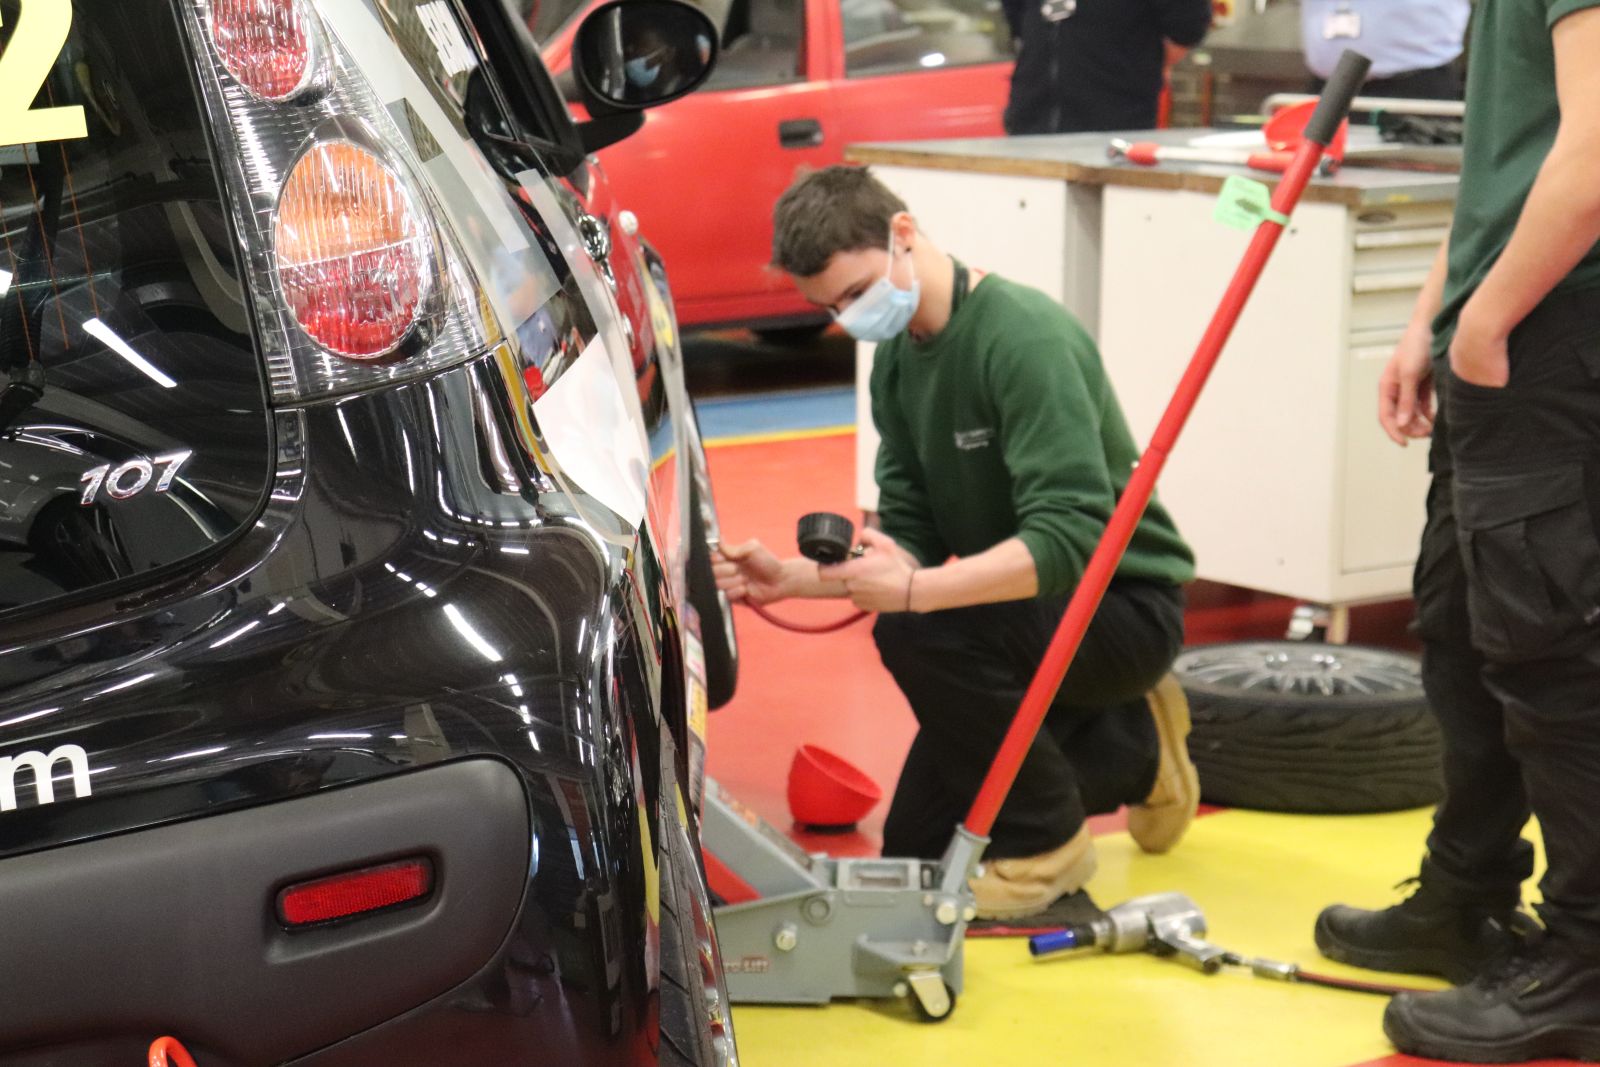 East Surrey College Motor Vehicle students take part in the Student Motorsport challenge